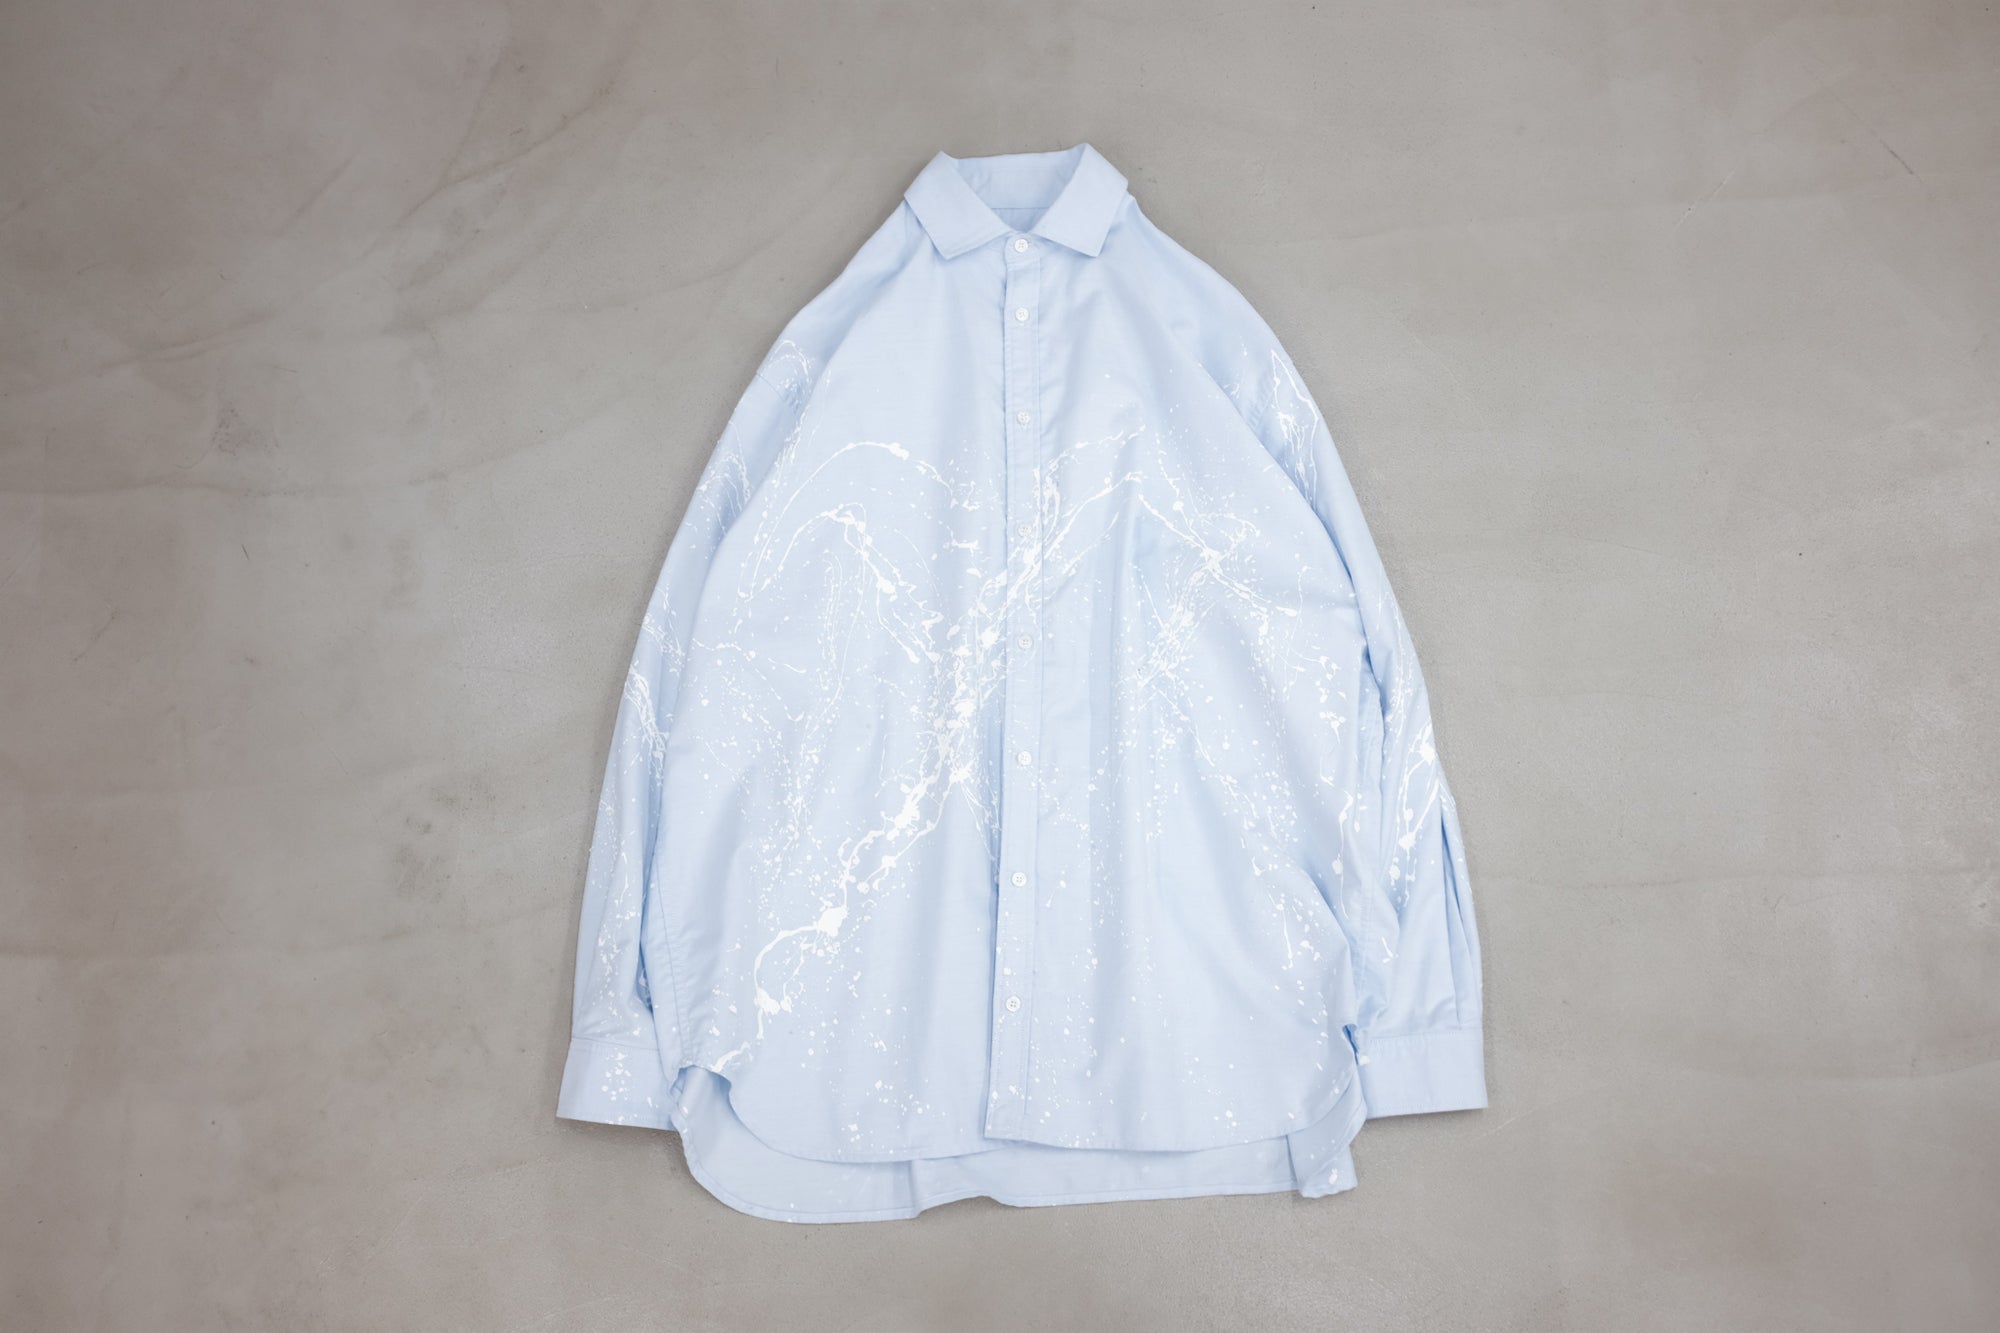 RESTOCK WILLY CHAVARRIA / BIG WILLY OXFORD SHIRT PAINT